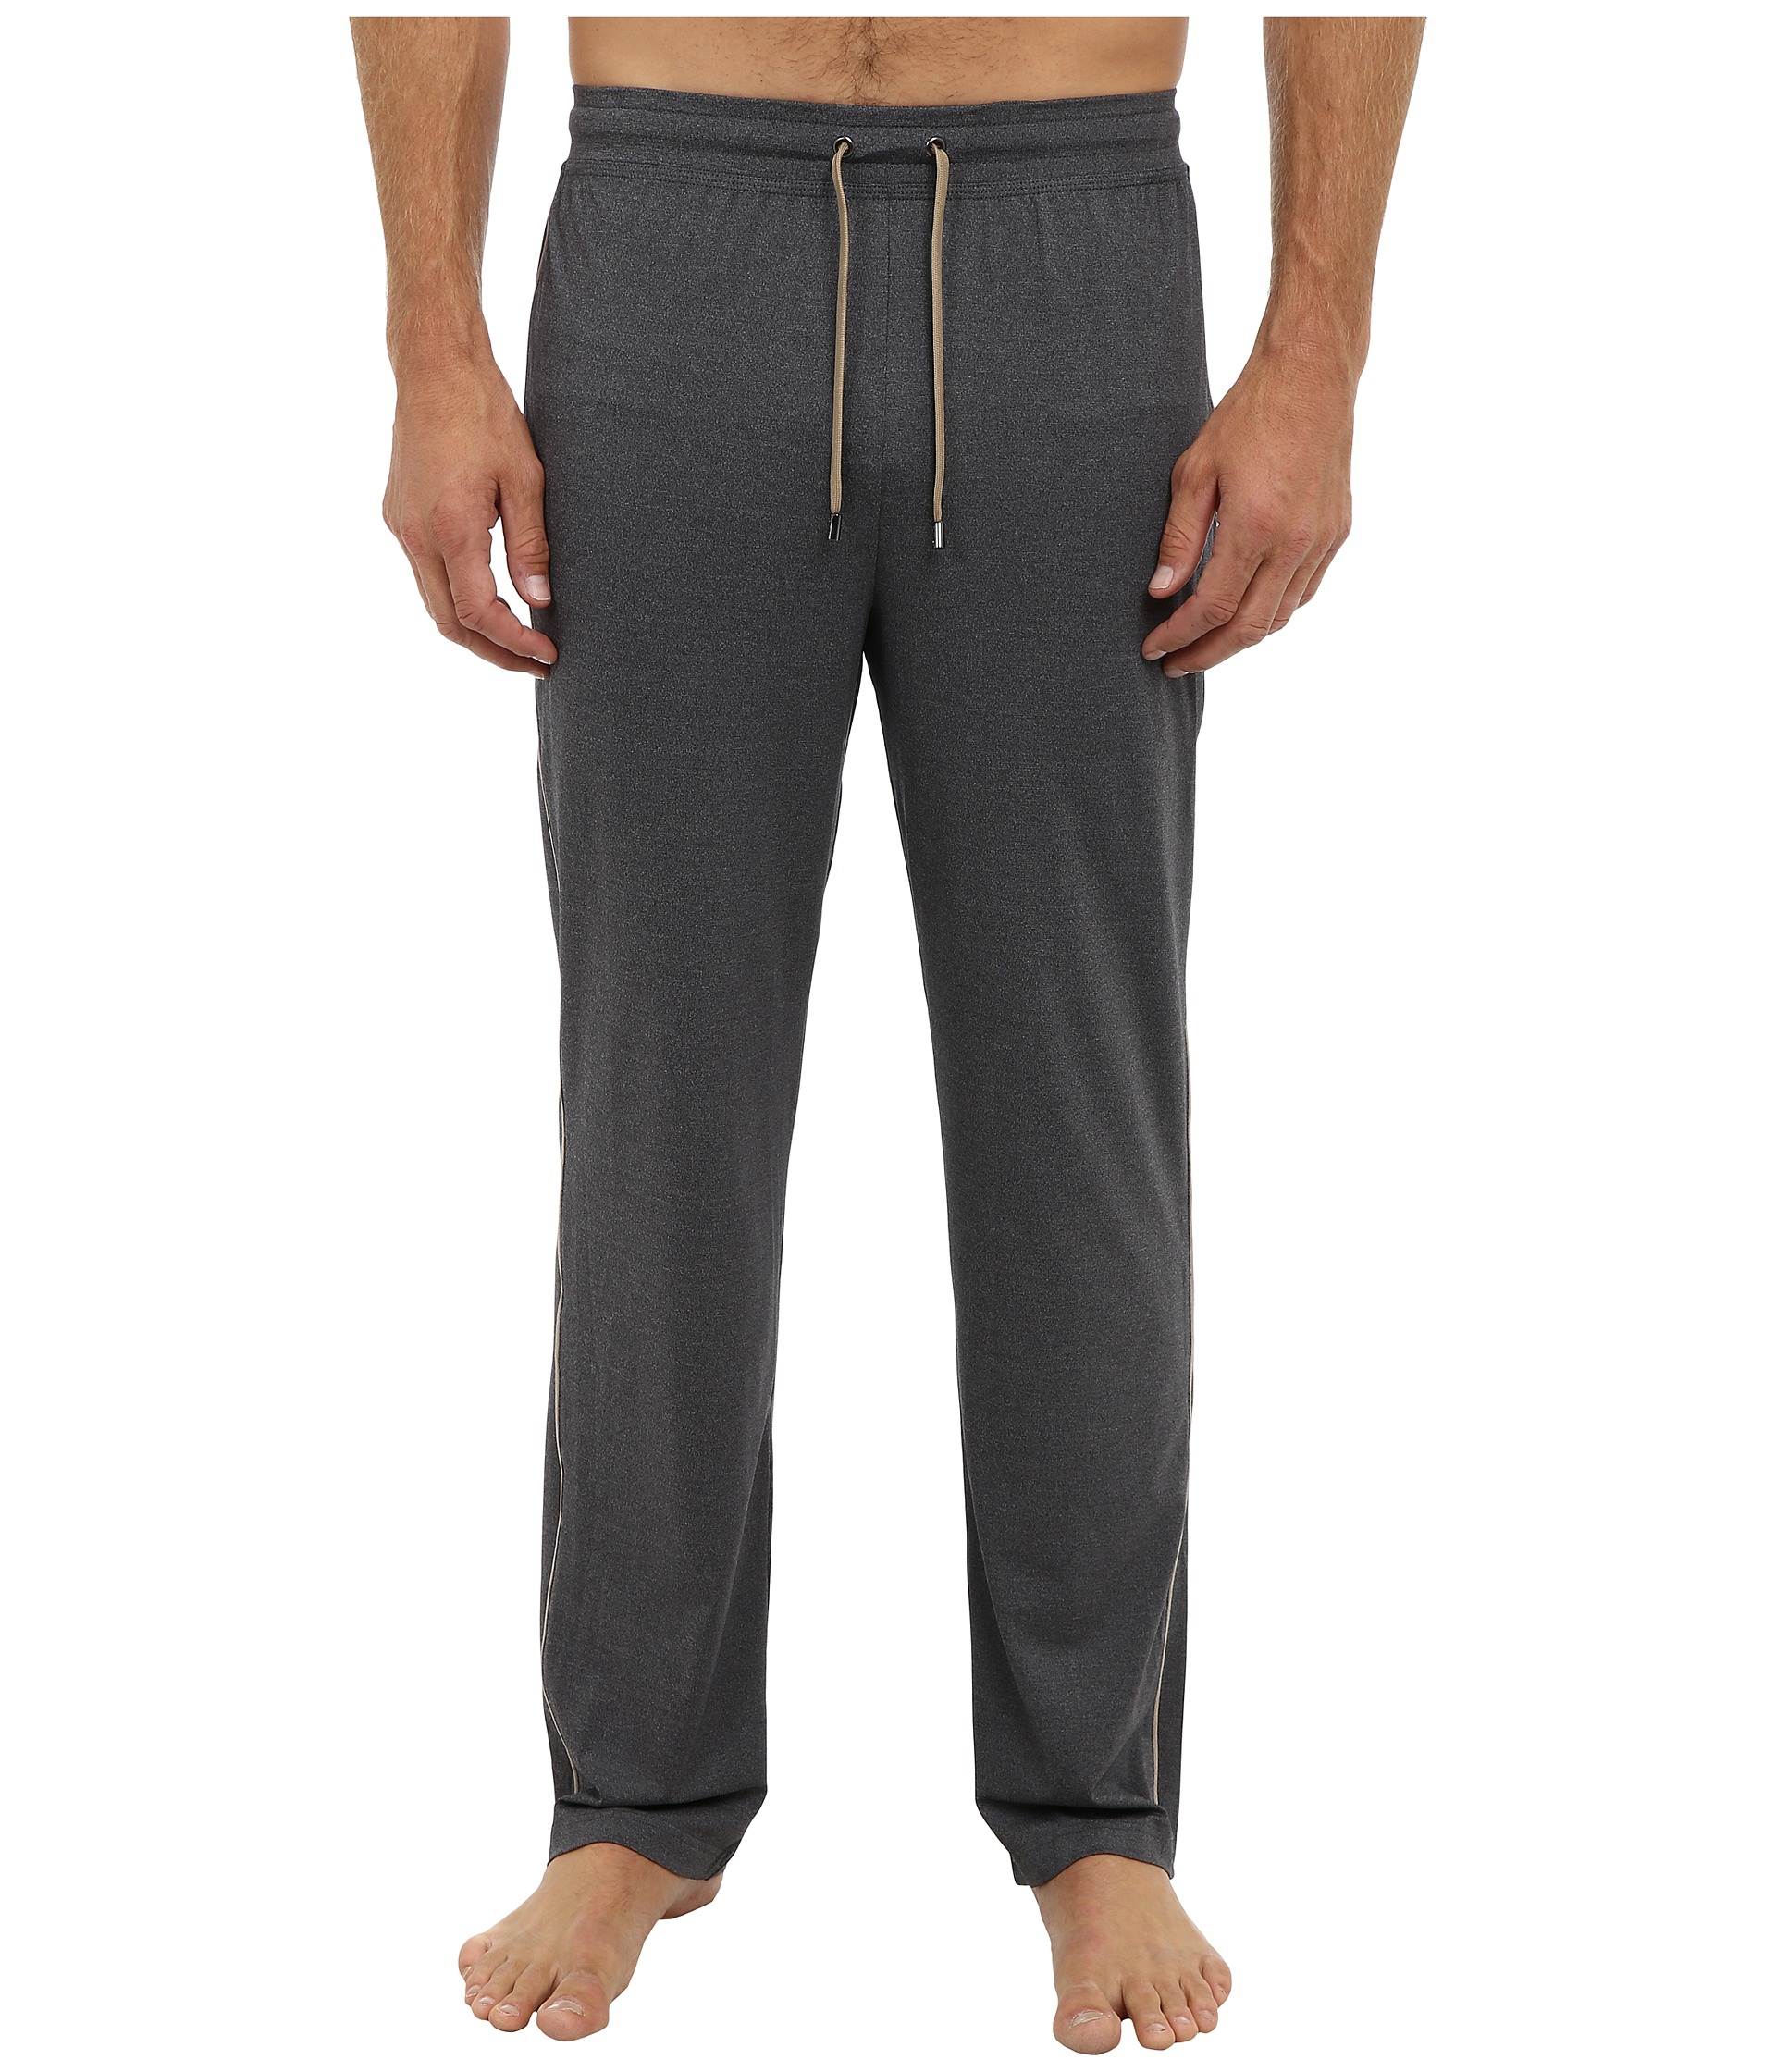 ... Yoga Pant M9682 Charcoal Heather, Clothing | Shipped Free at Zappos